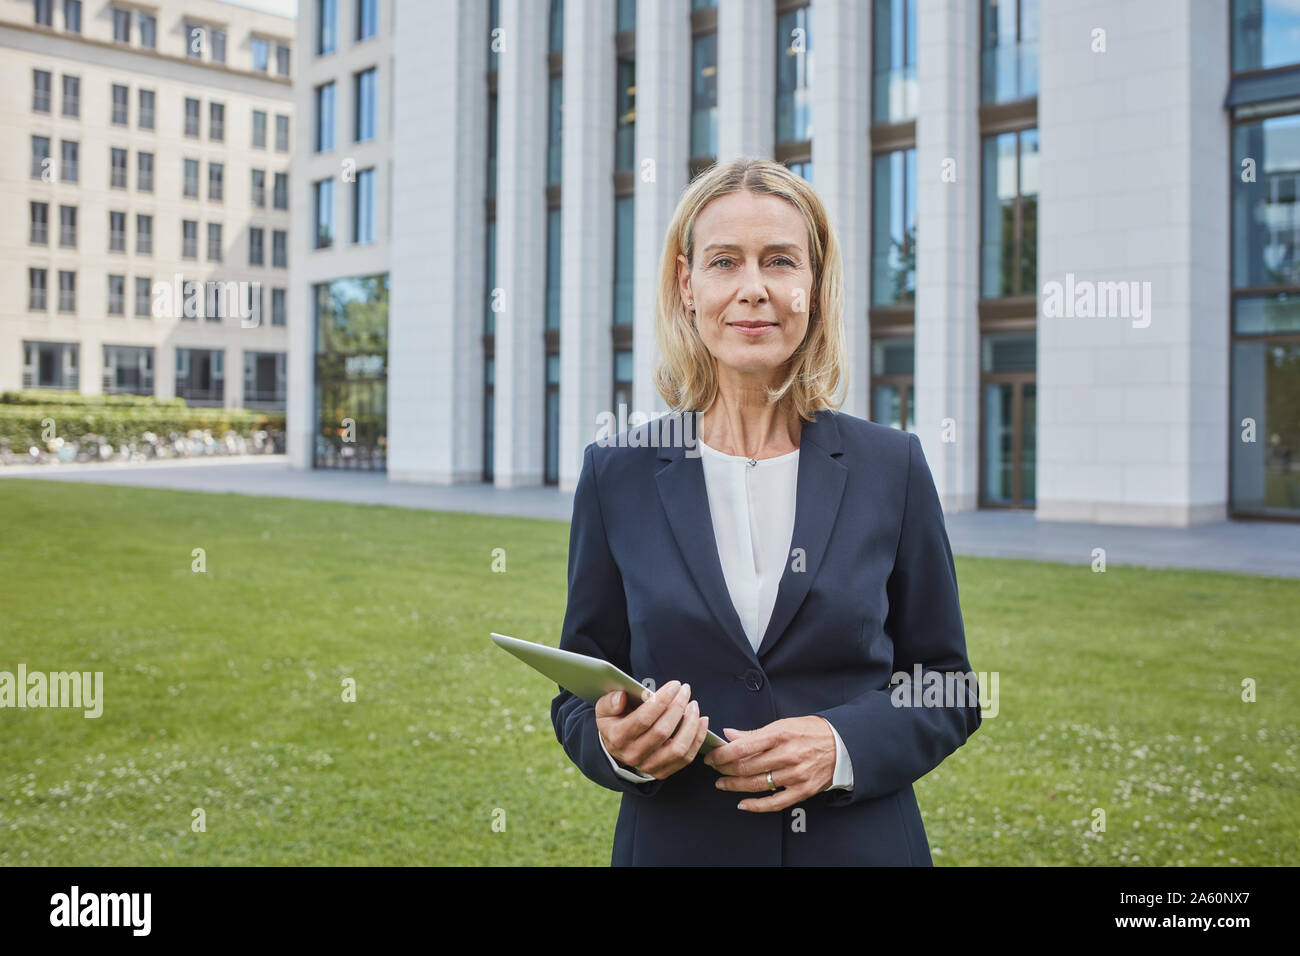 Portrait of confident businesswoman with tablet standing on lawn in the city Stock Photo